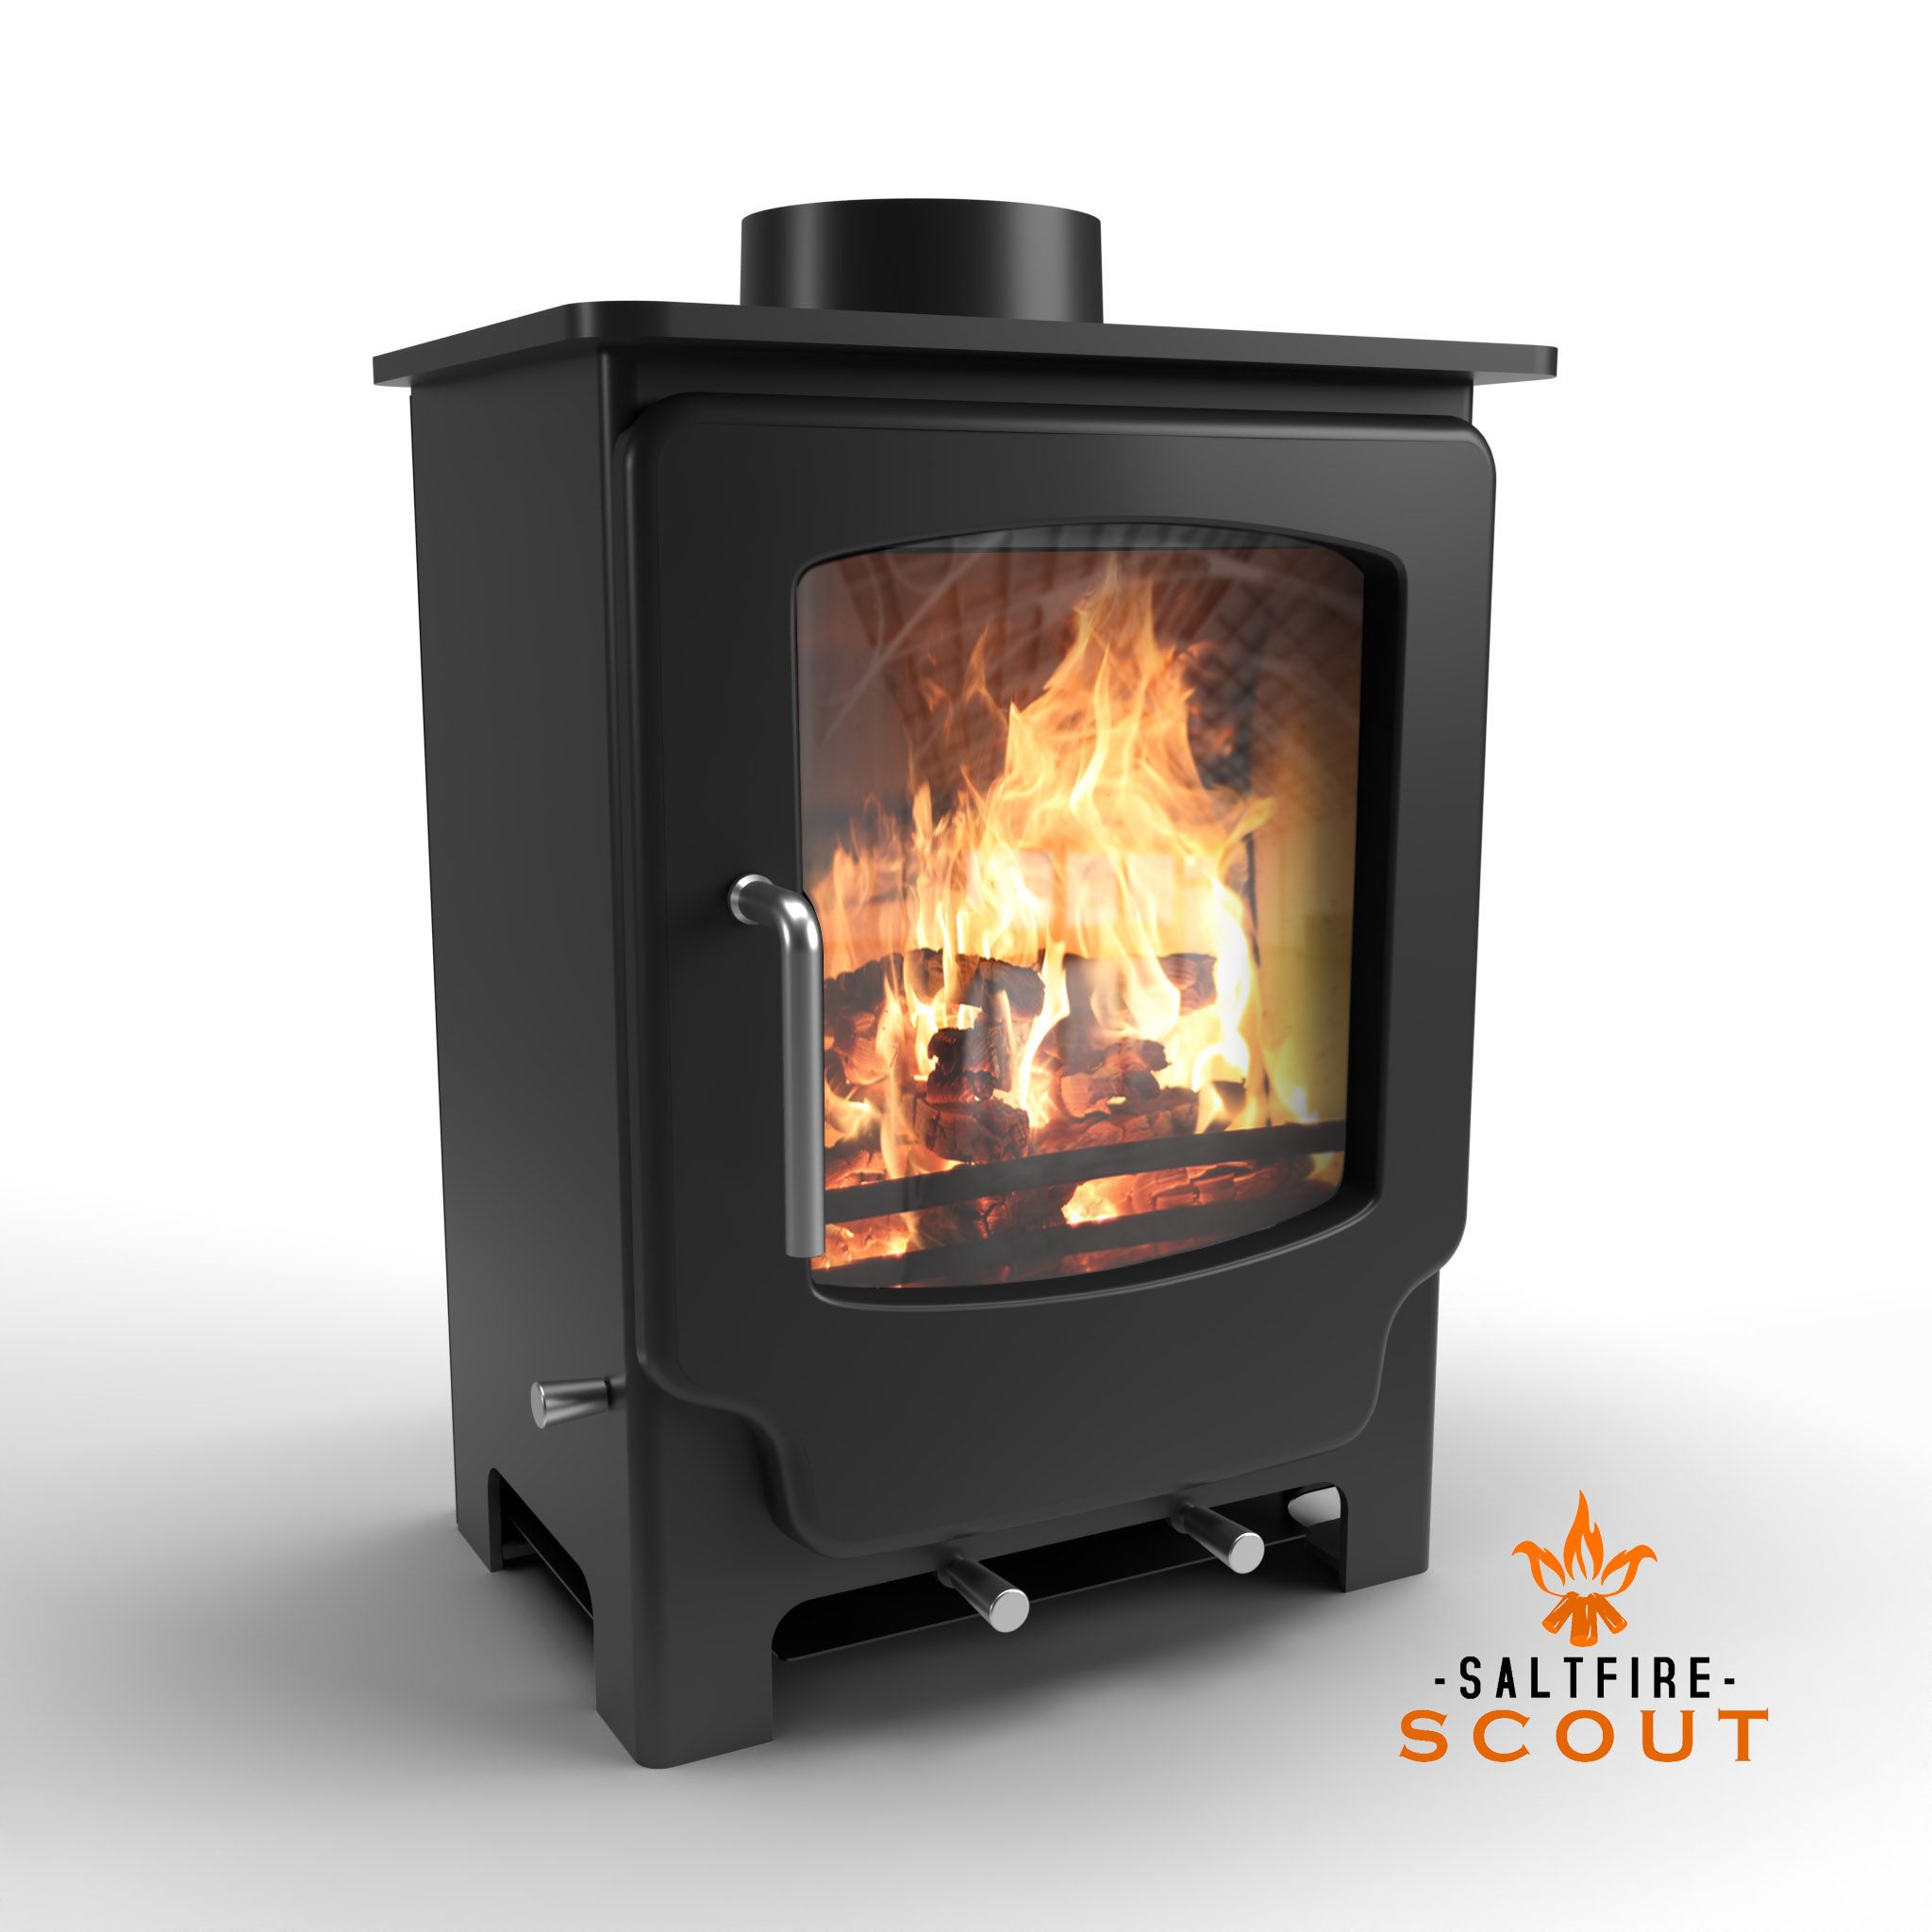 Saltfire Scout Multifuel Stove 4.1KW - Eco Design Ready